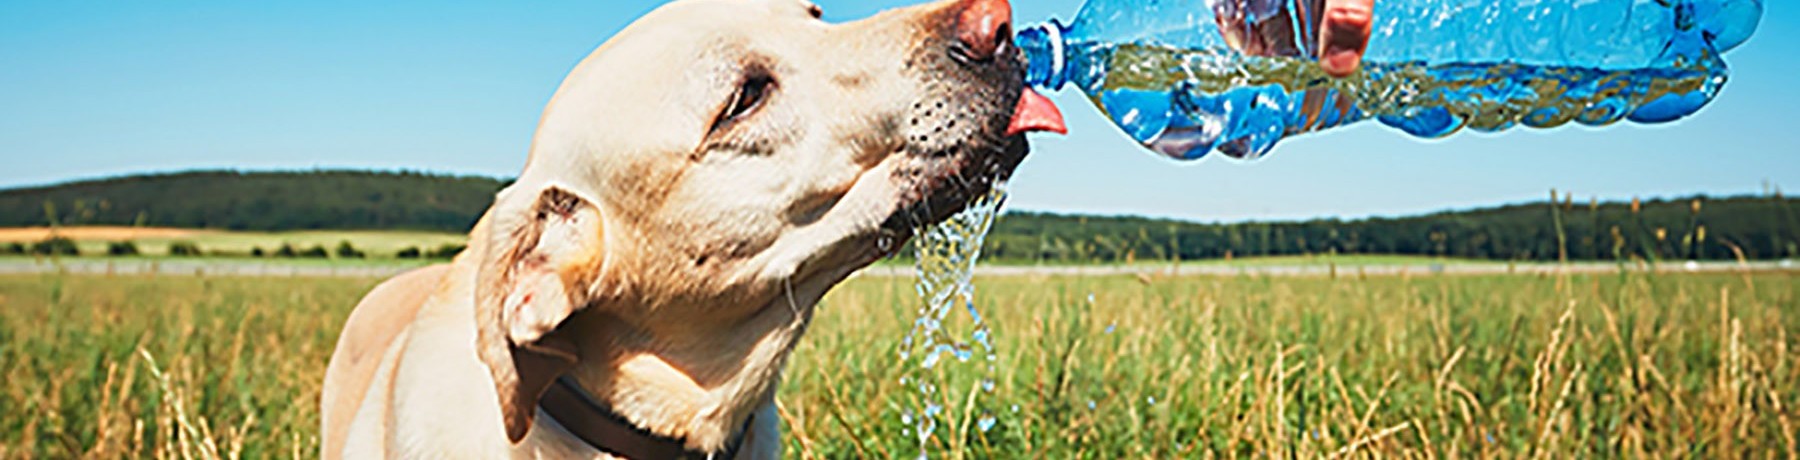 KEEPING YOUR DOGS COOL IN THE SUMMER image